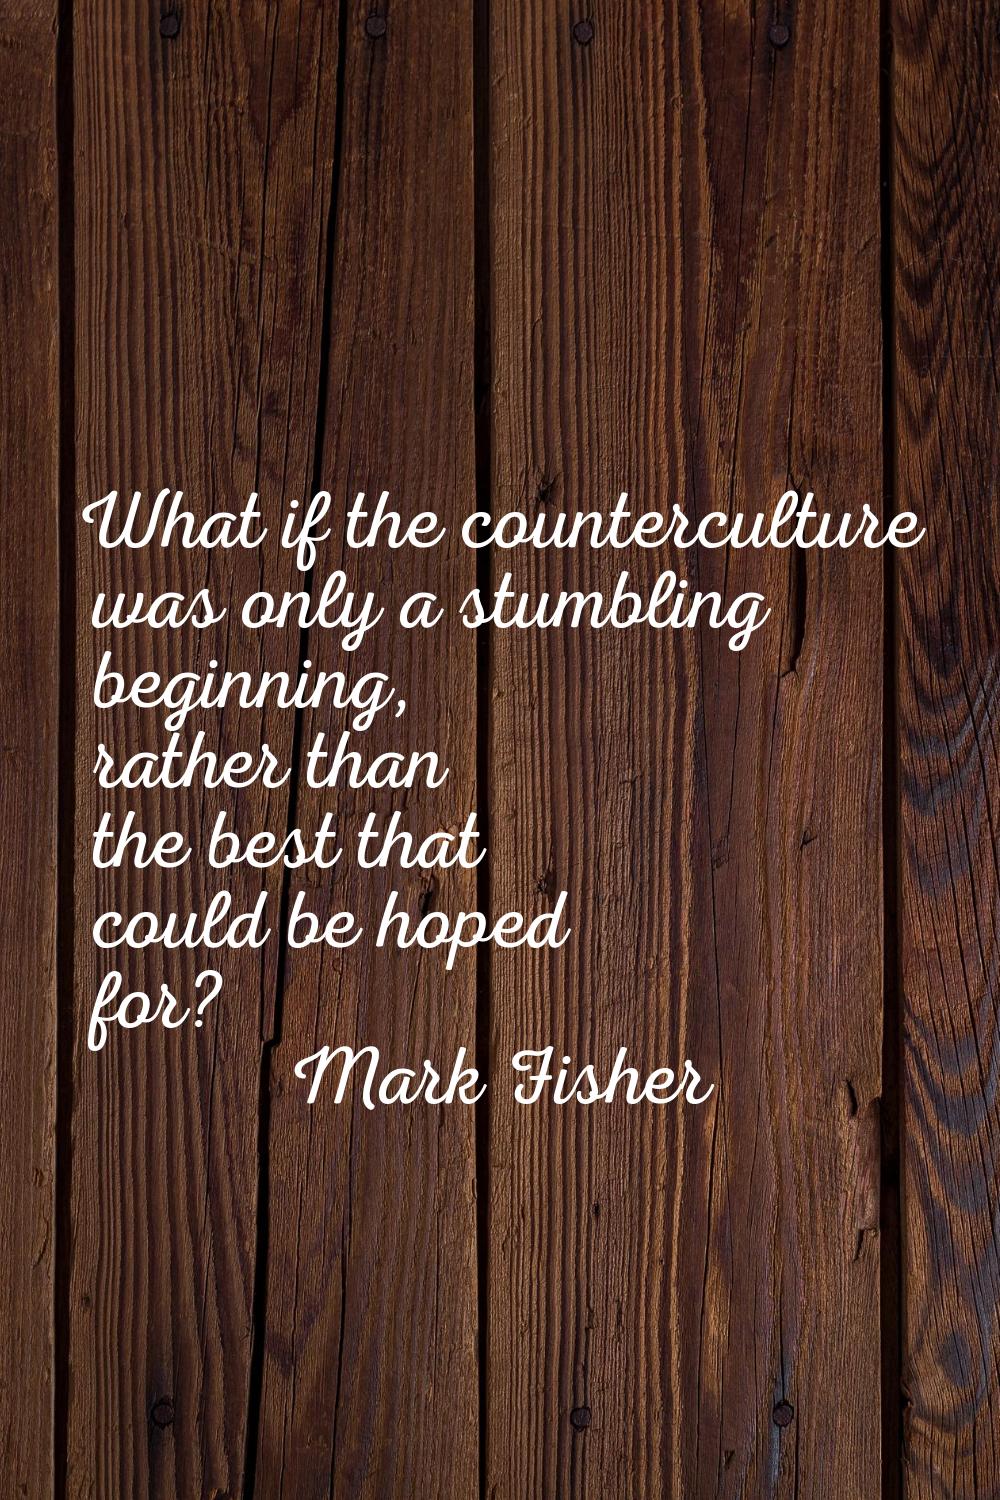 What if the counterculture was only a stumbling beginning, rather than the best that could be hoped